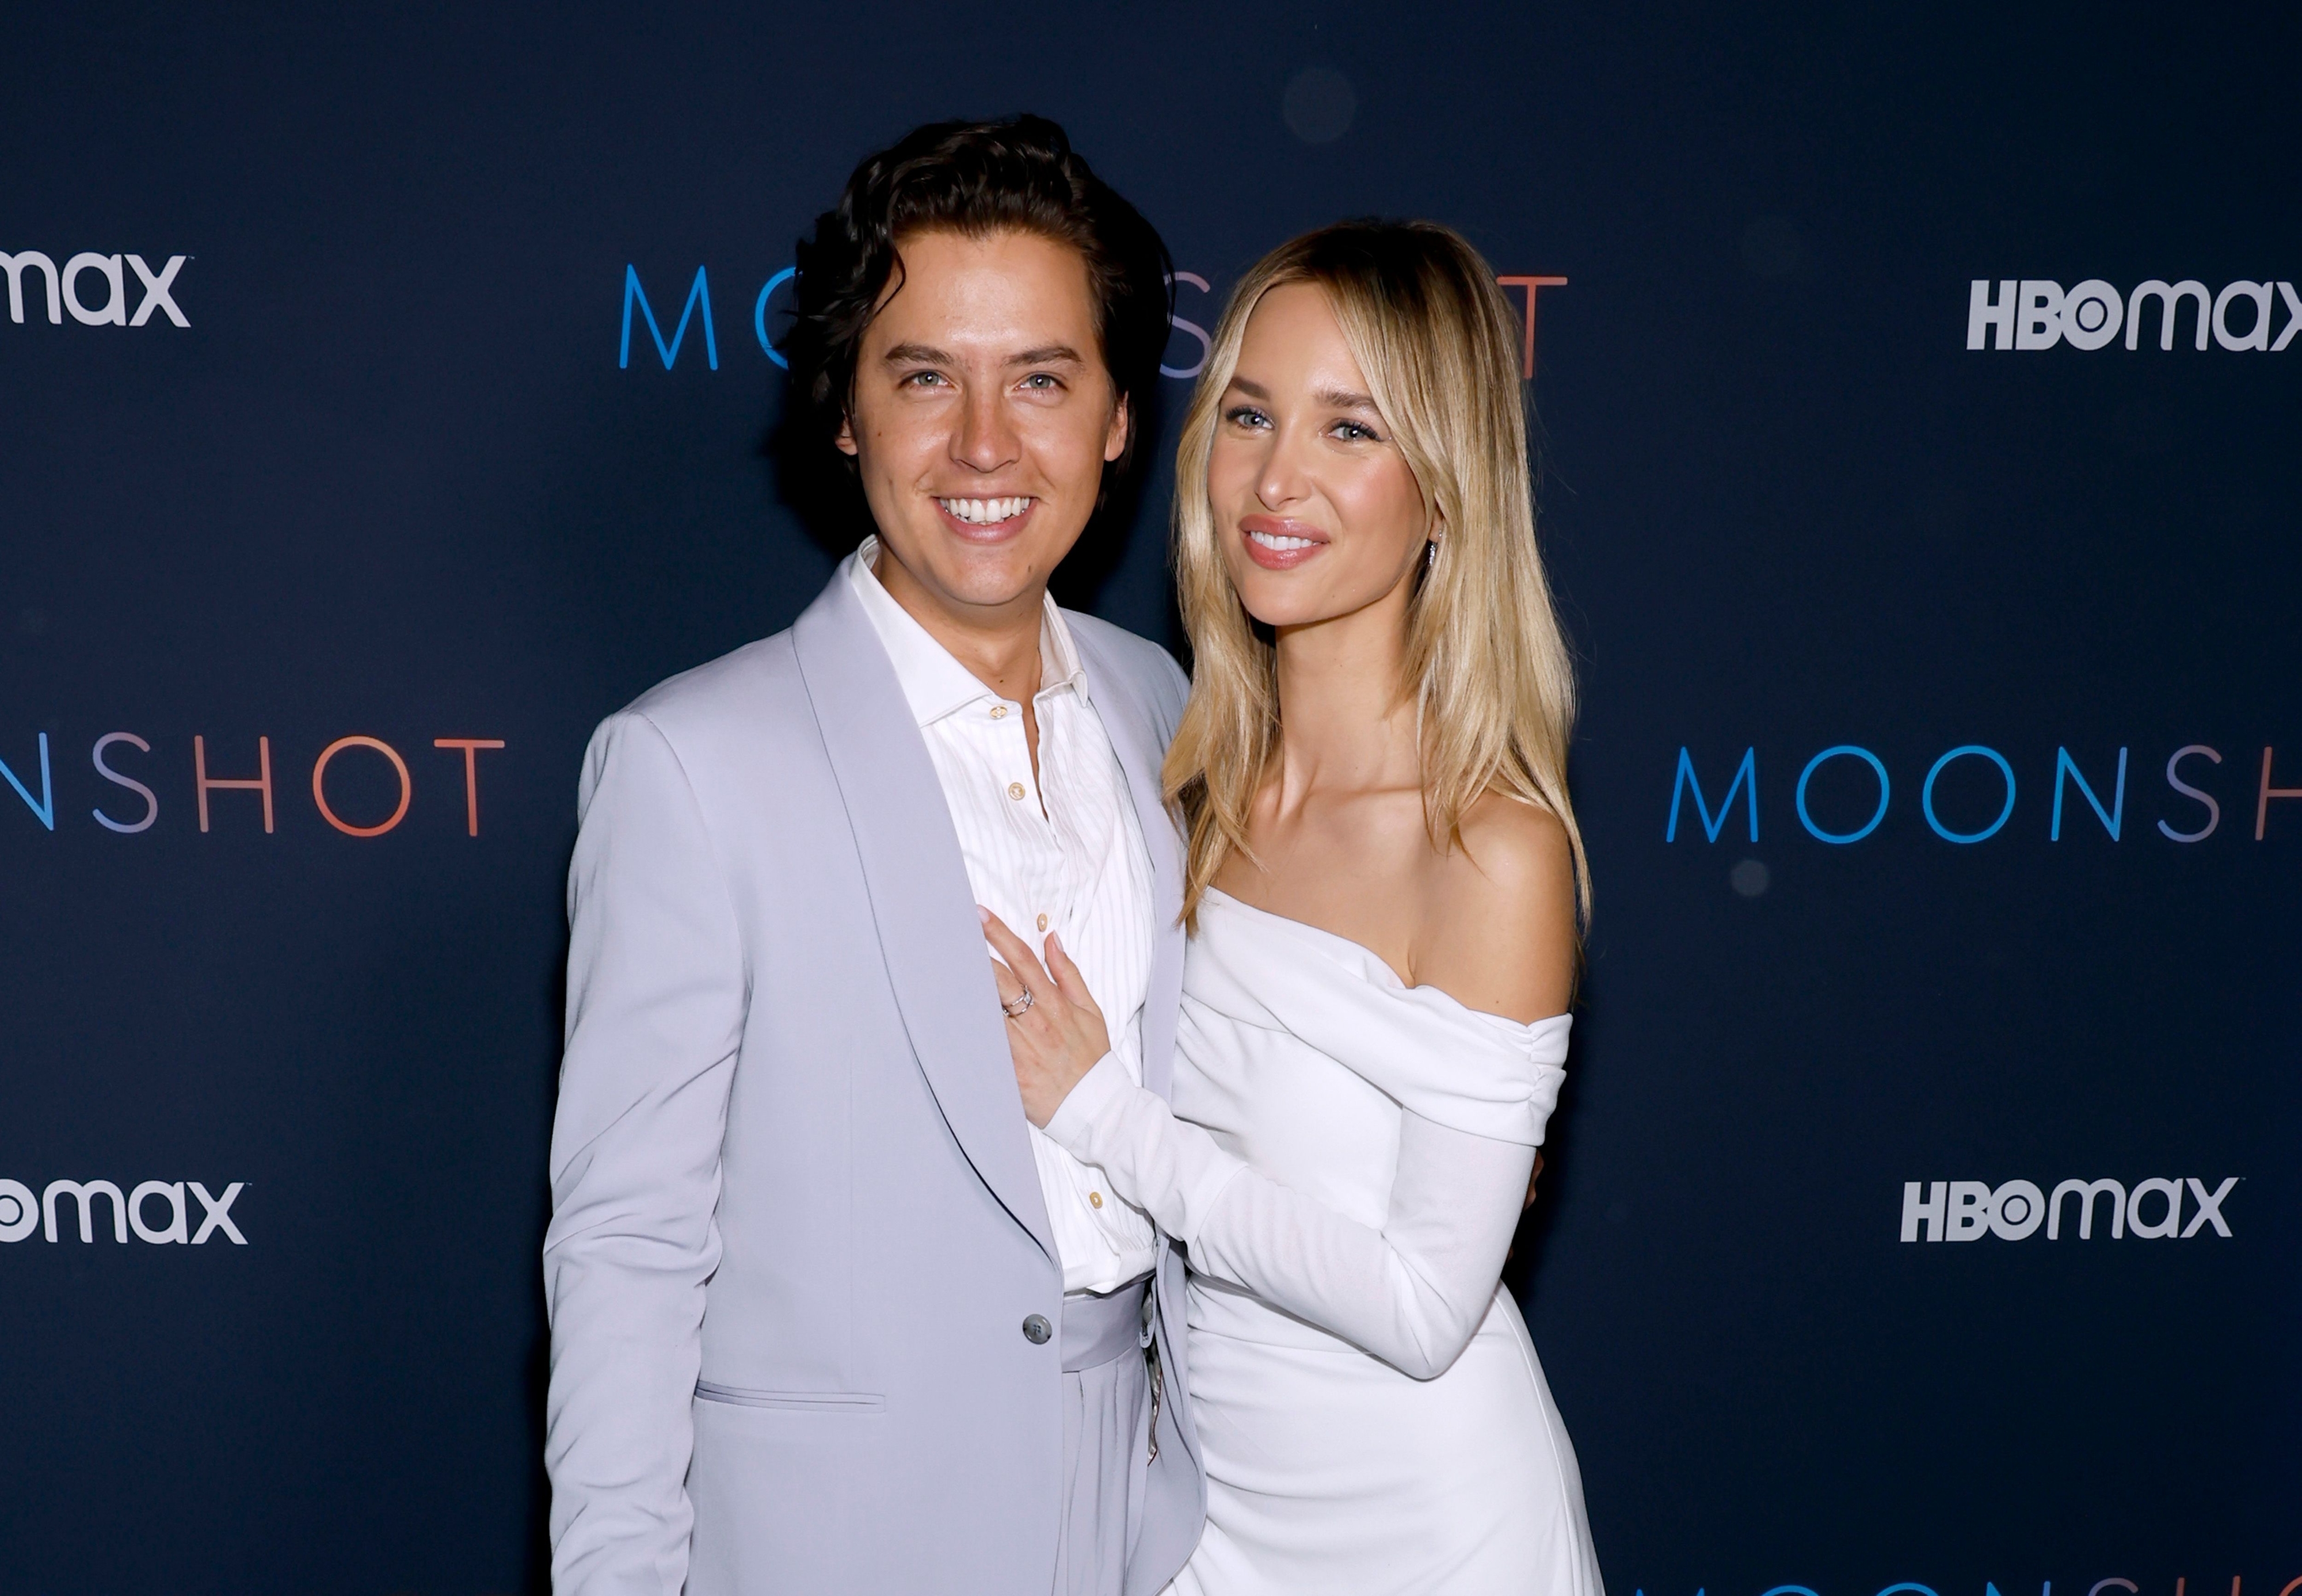 Cole Sprouse and Ari Fournier smiling for photographers at a media event